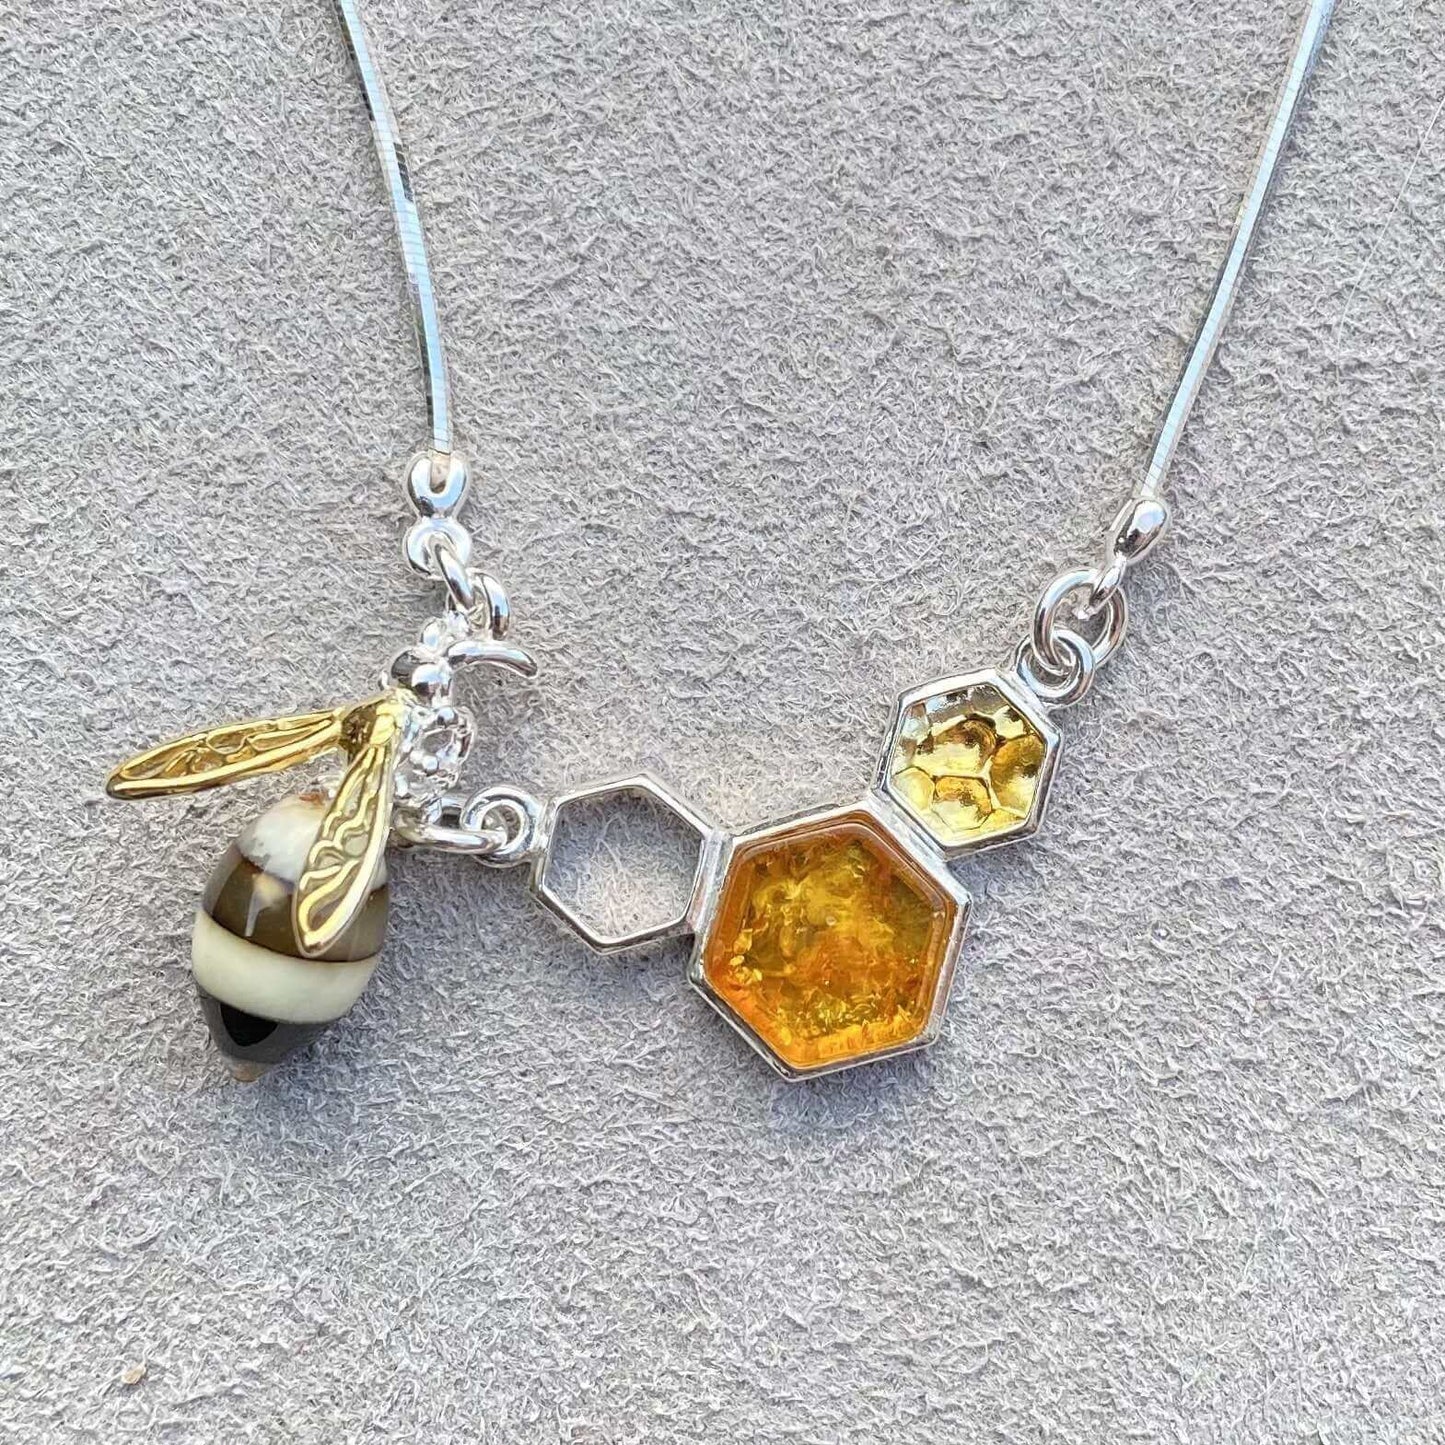 Baltic Amber Honeycomb Bee Necklace - Twelve Silver Trees